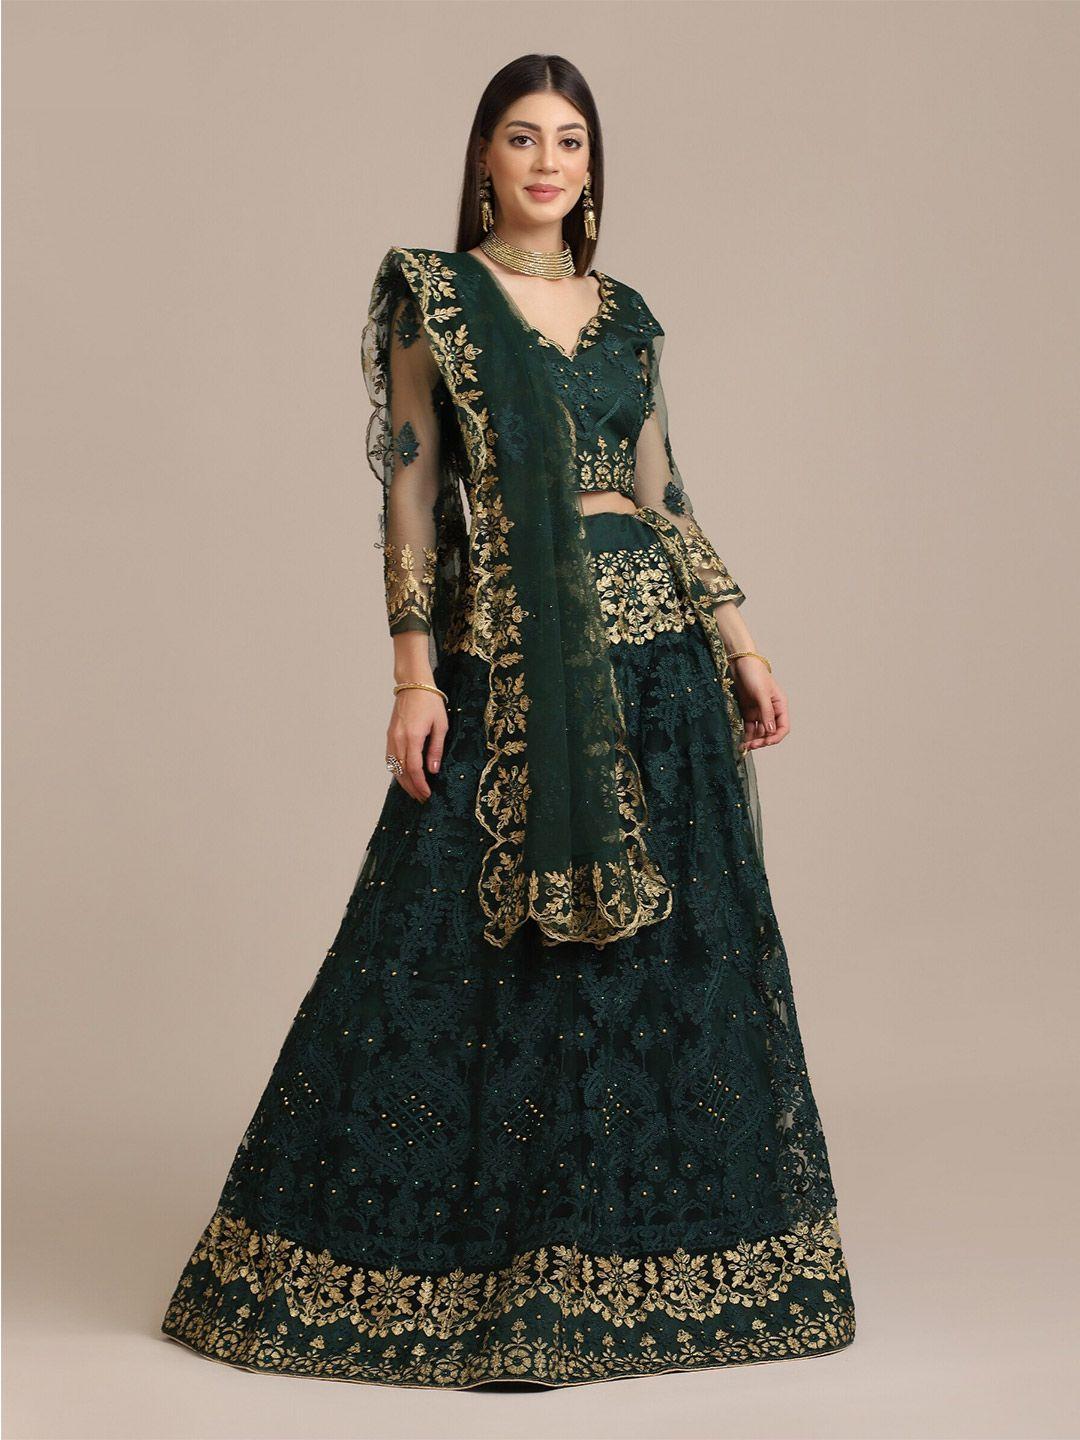 warthy ent green & gold-toned embellished thread work semi-stitched lehenga & unstitched blouse with dupatta